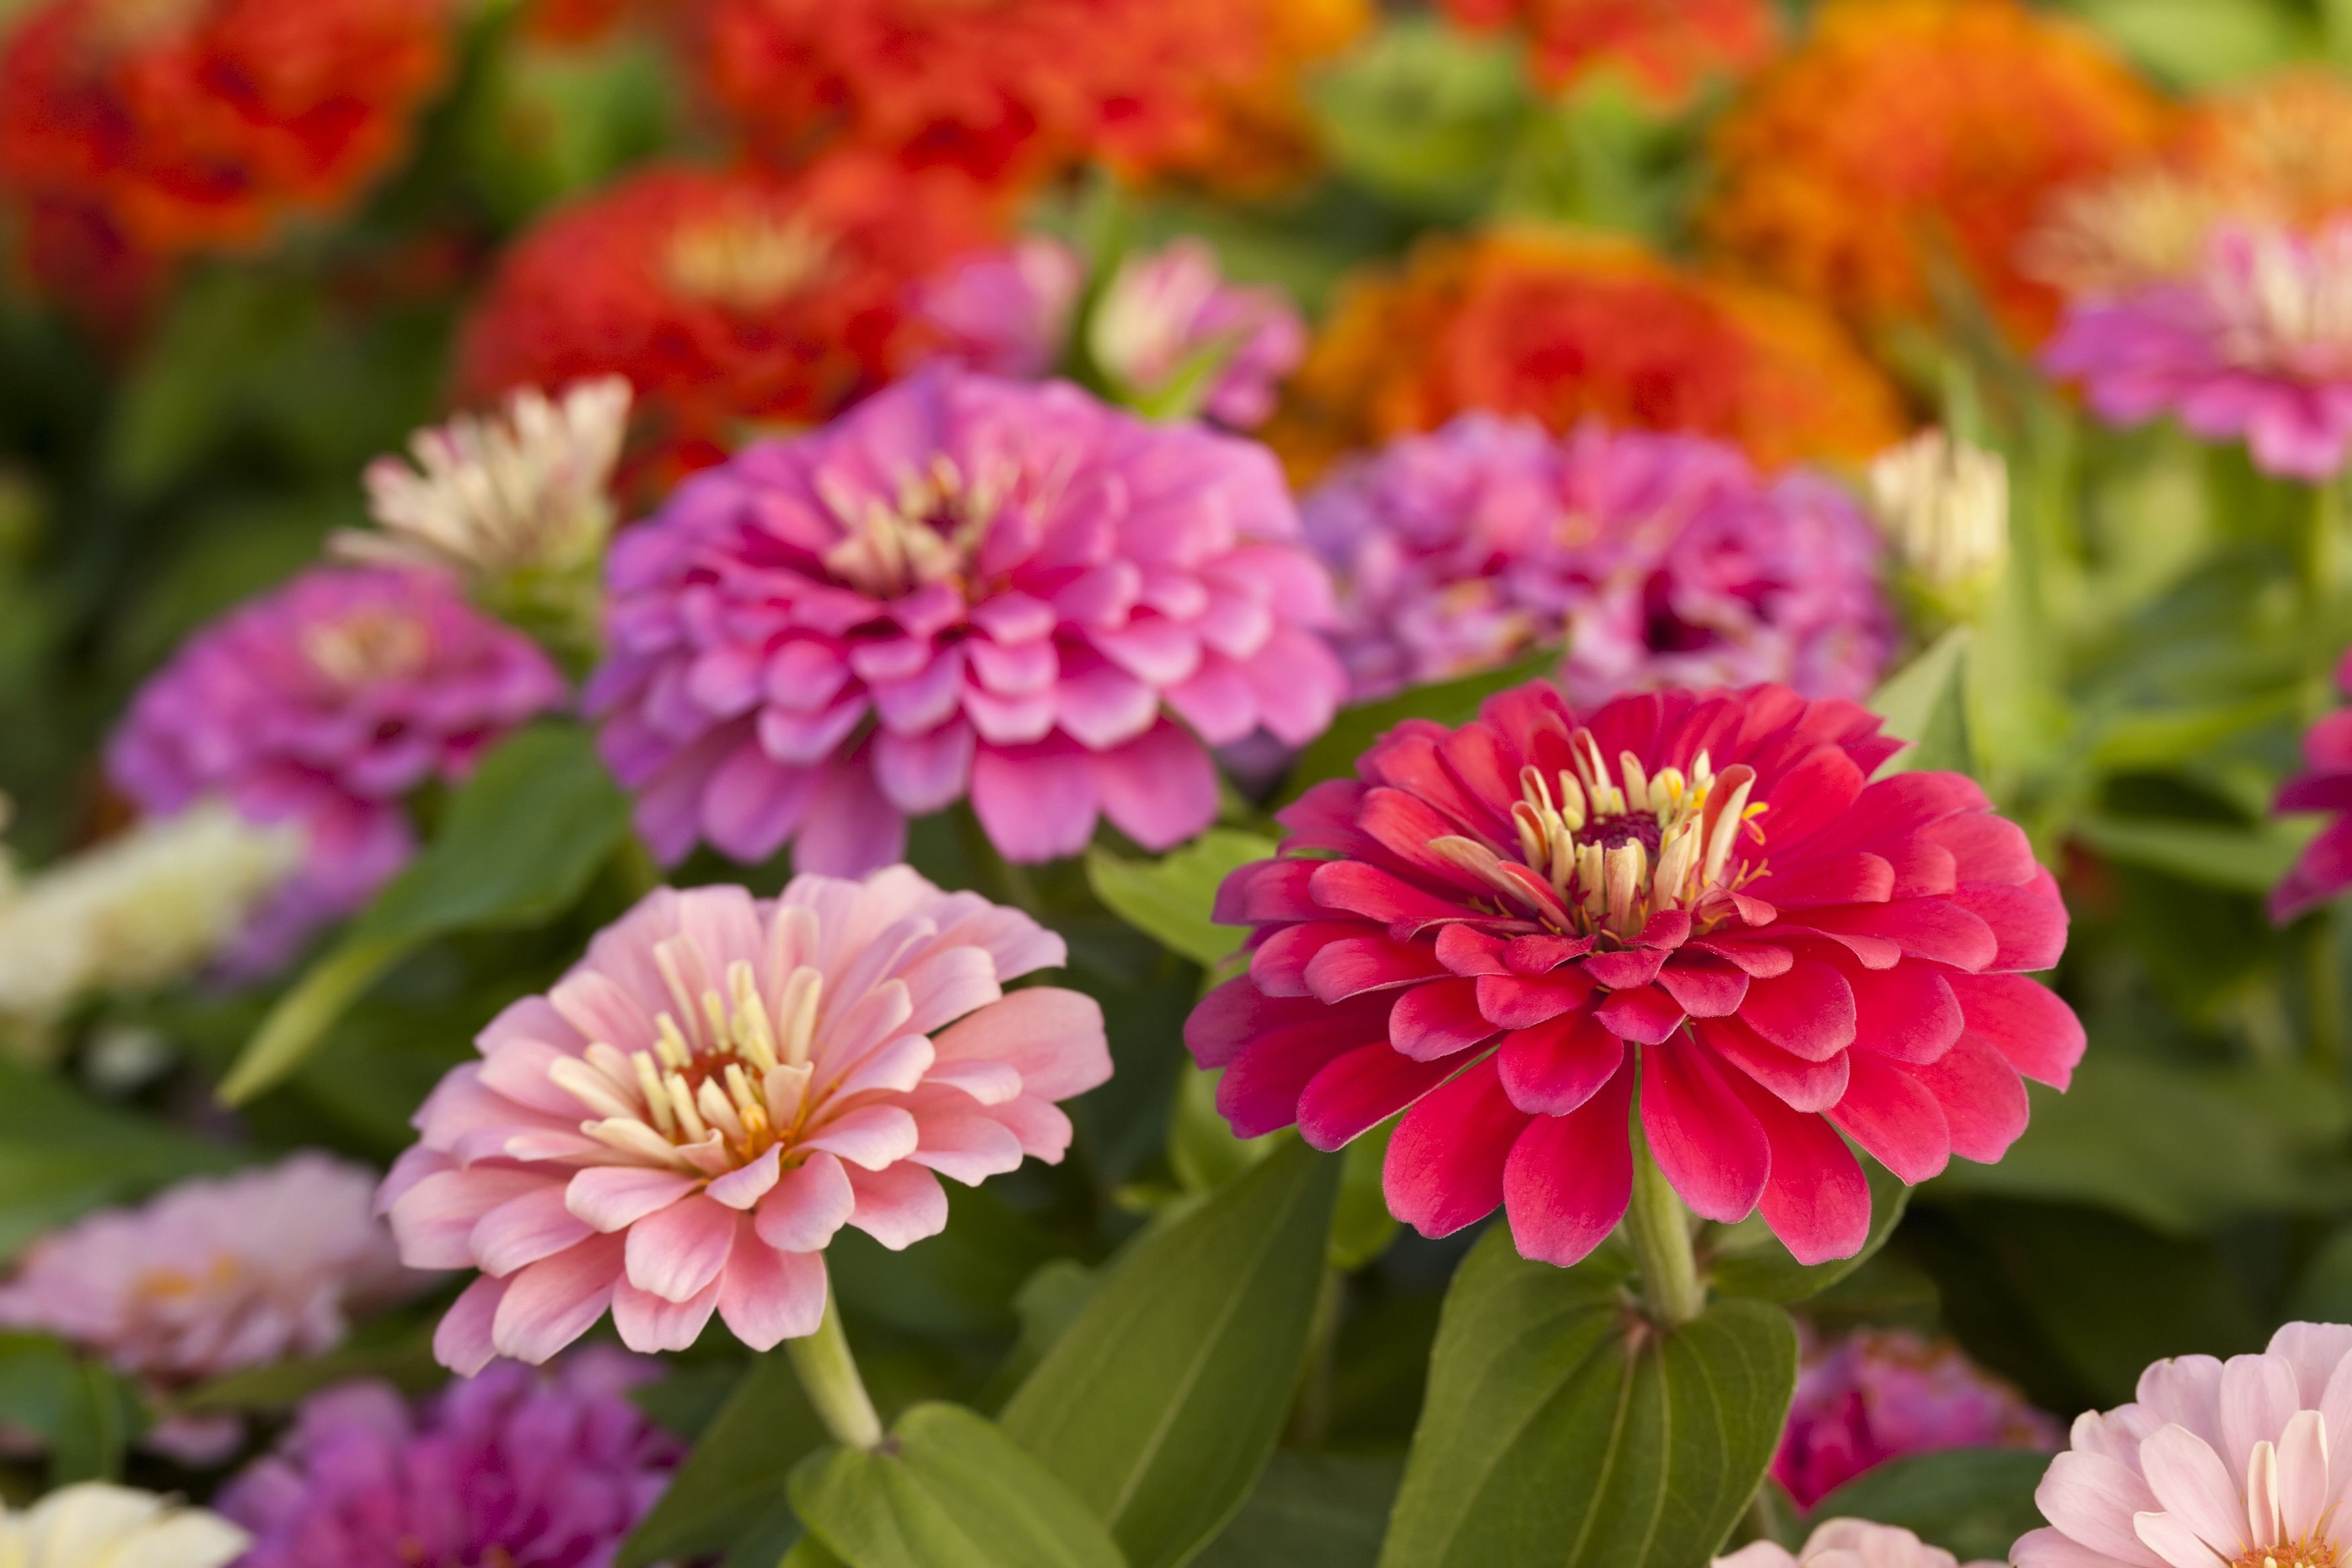 23 Best Summer Flowers for Your Garden - Pretty Summer Blooming Plants